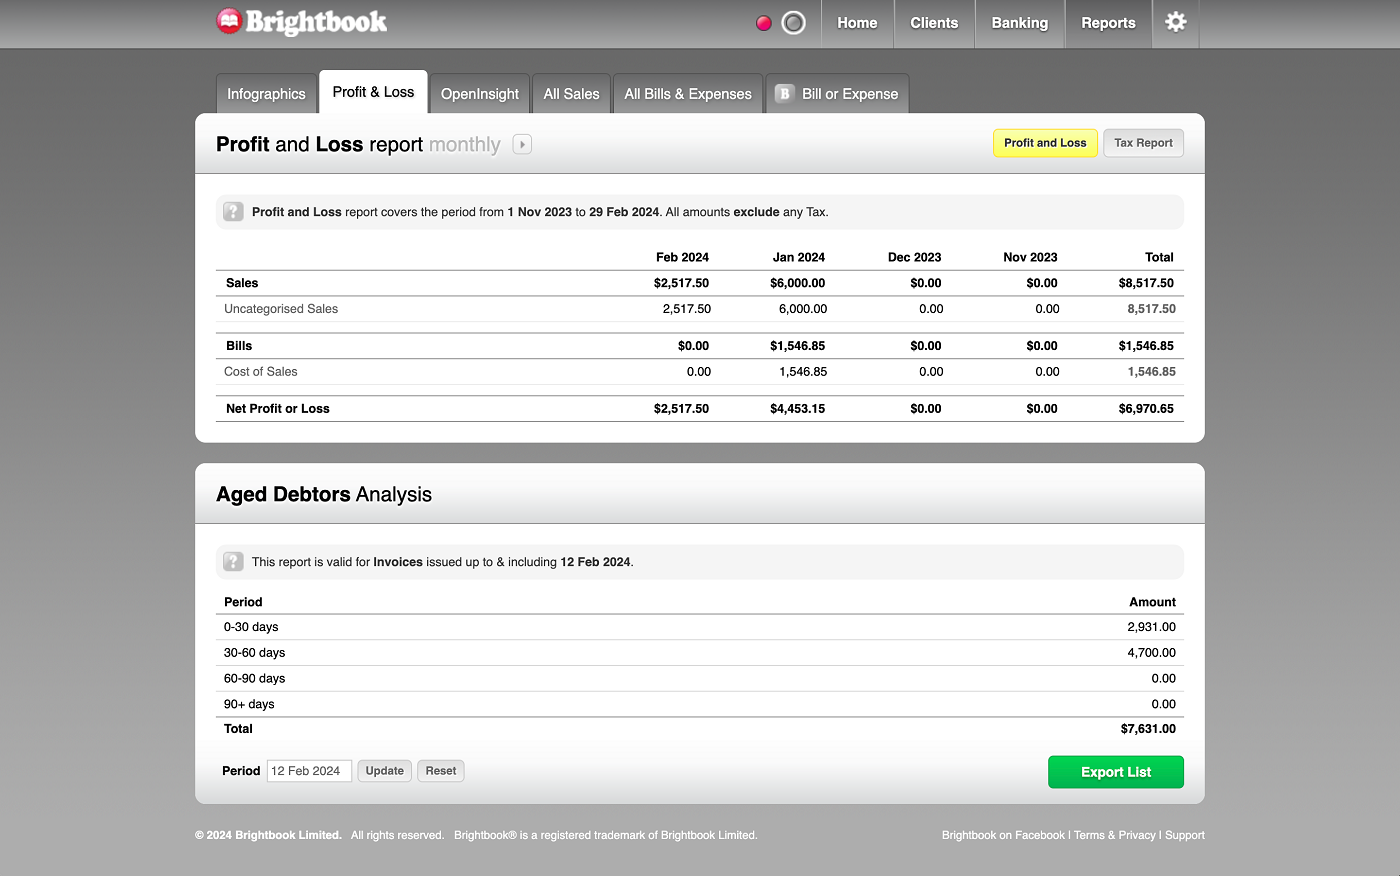 Take advantage of Brightbook’s reports to see where you can improve or adjust your financials.